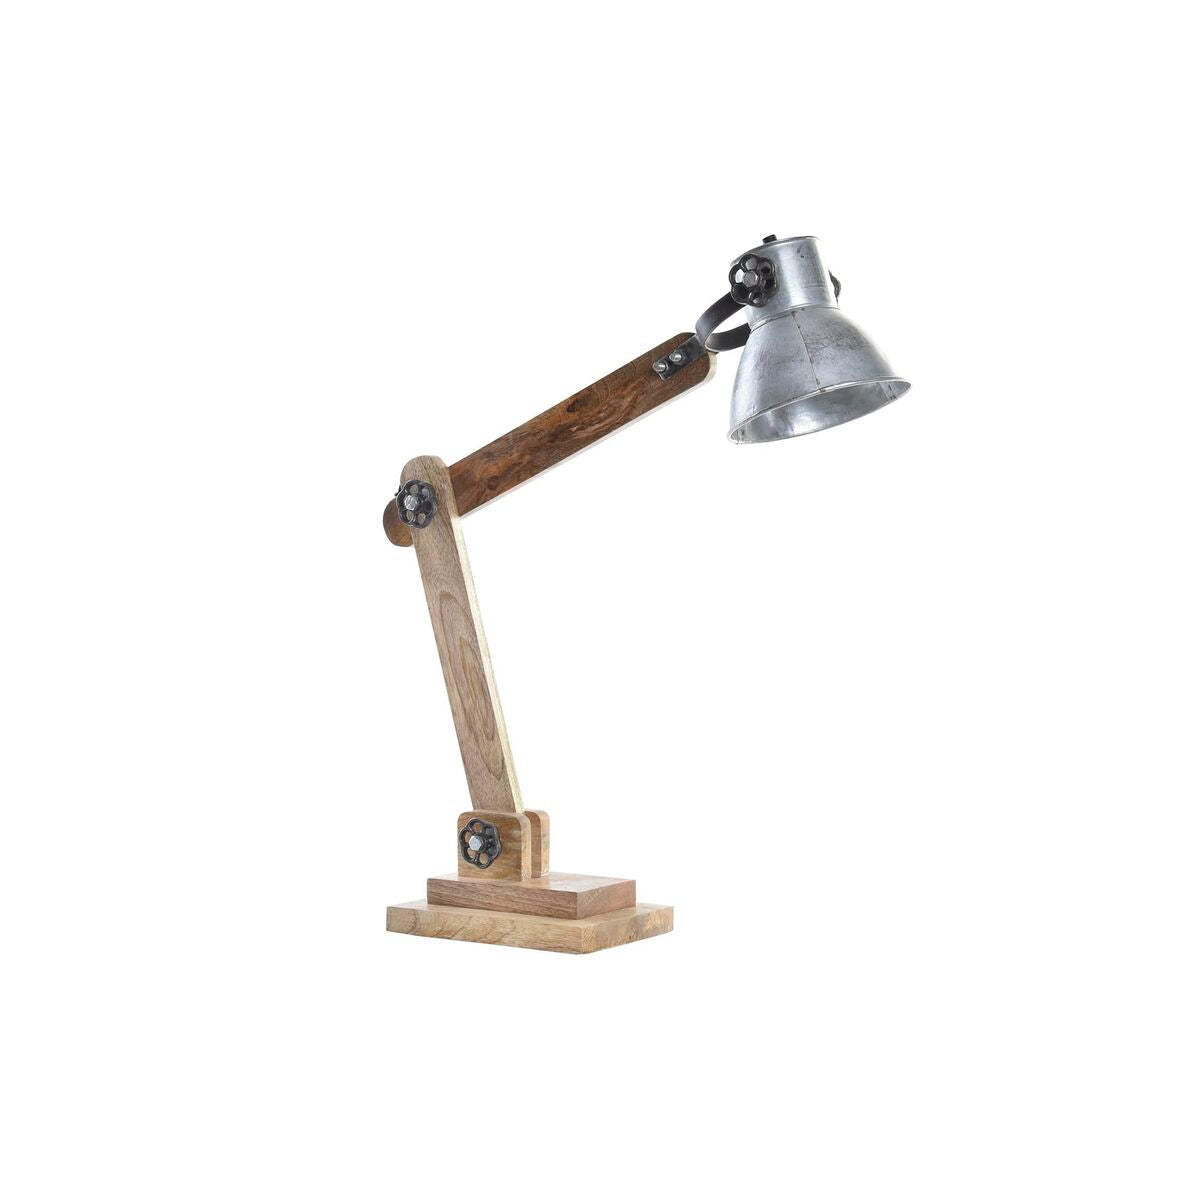 Desk lamp in Wood and Silver Finish 220 V 50 W (50 x 15 x 65 cm)